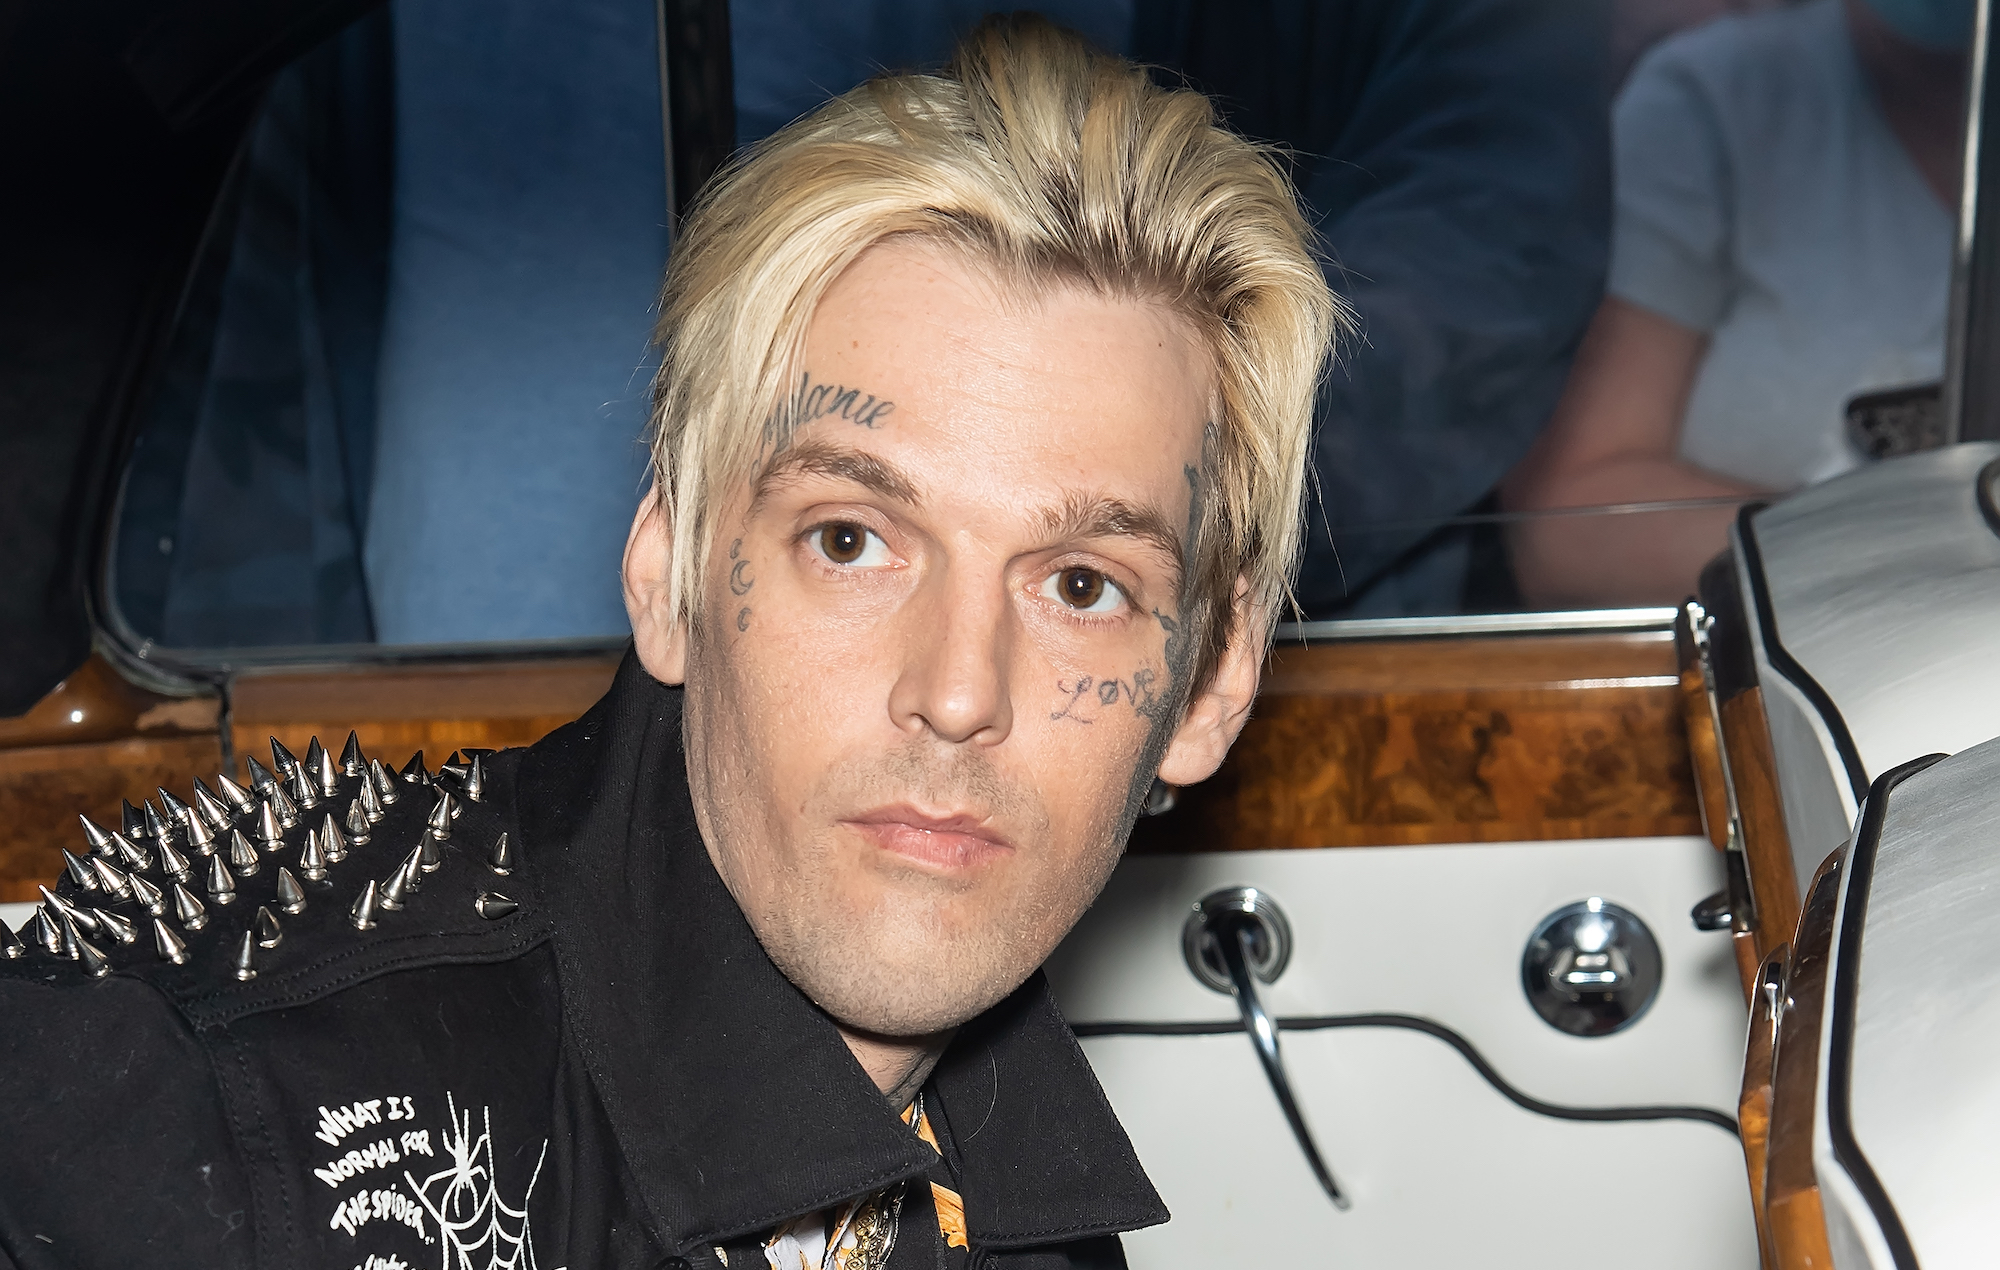 Police say no evidence of foul play in Aaron Carter’s death as mother calls for “real investigation”